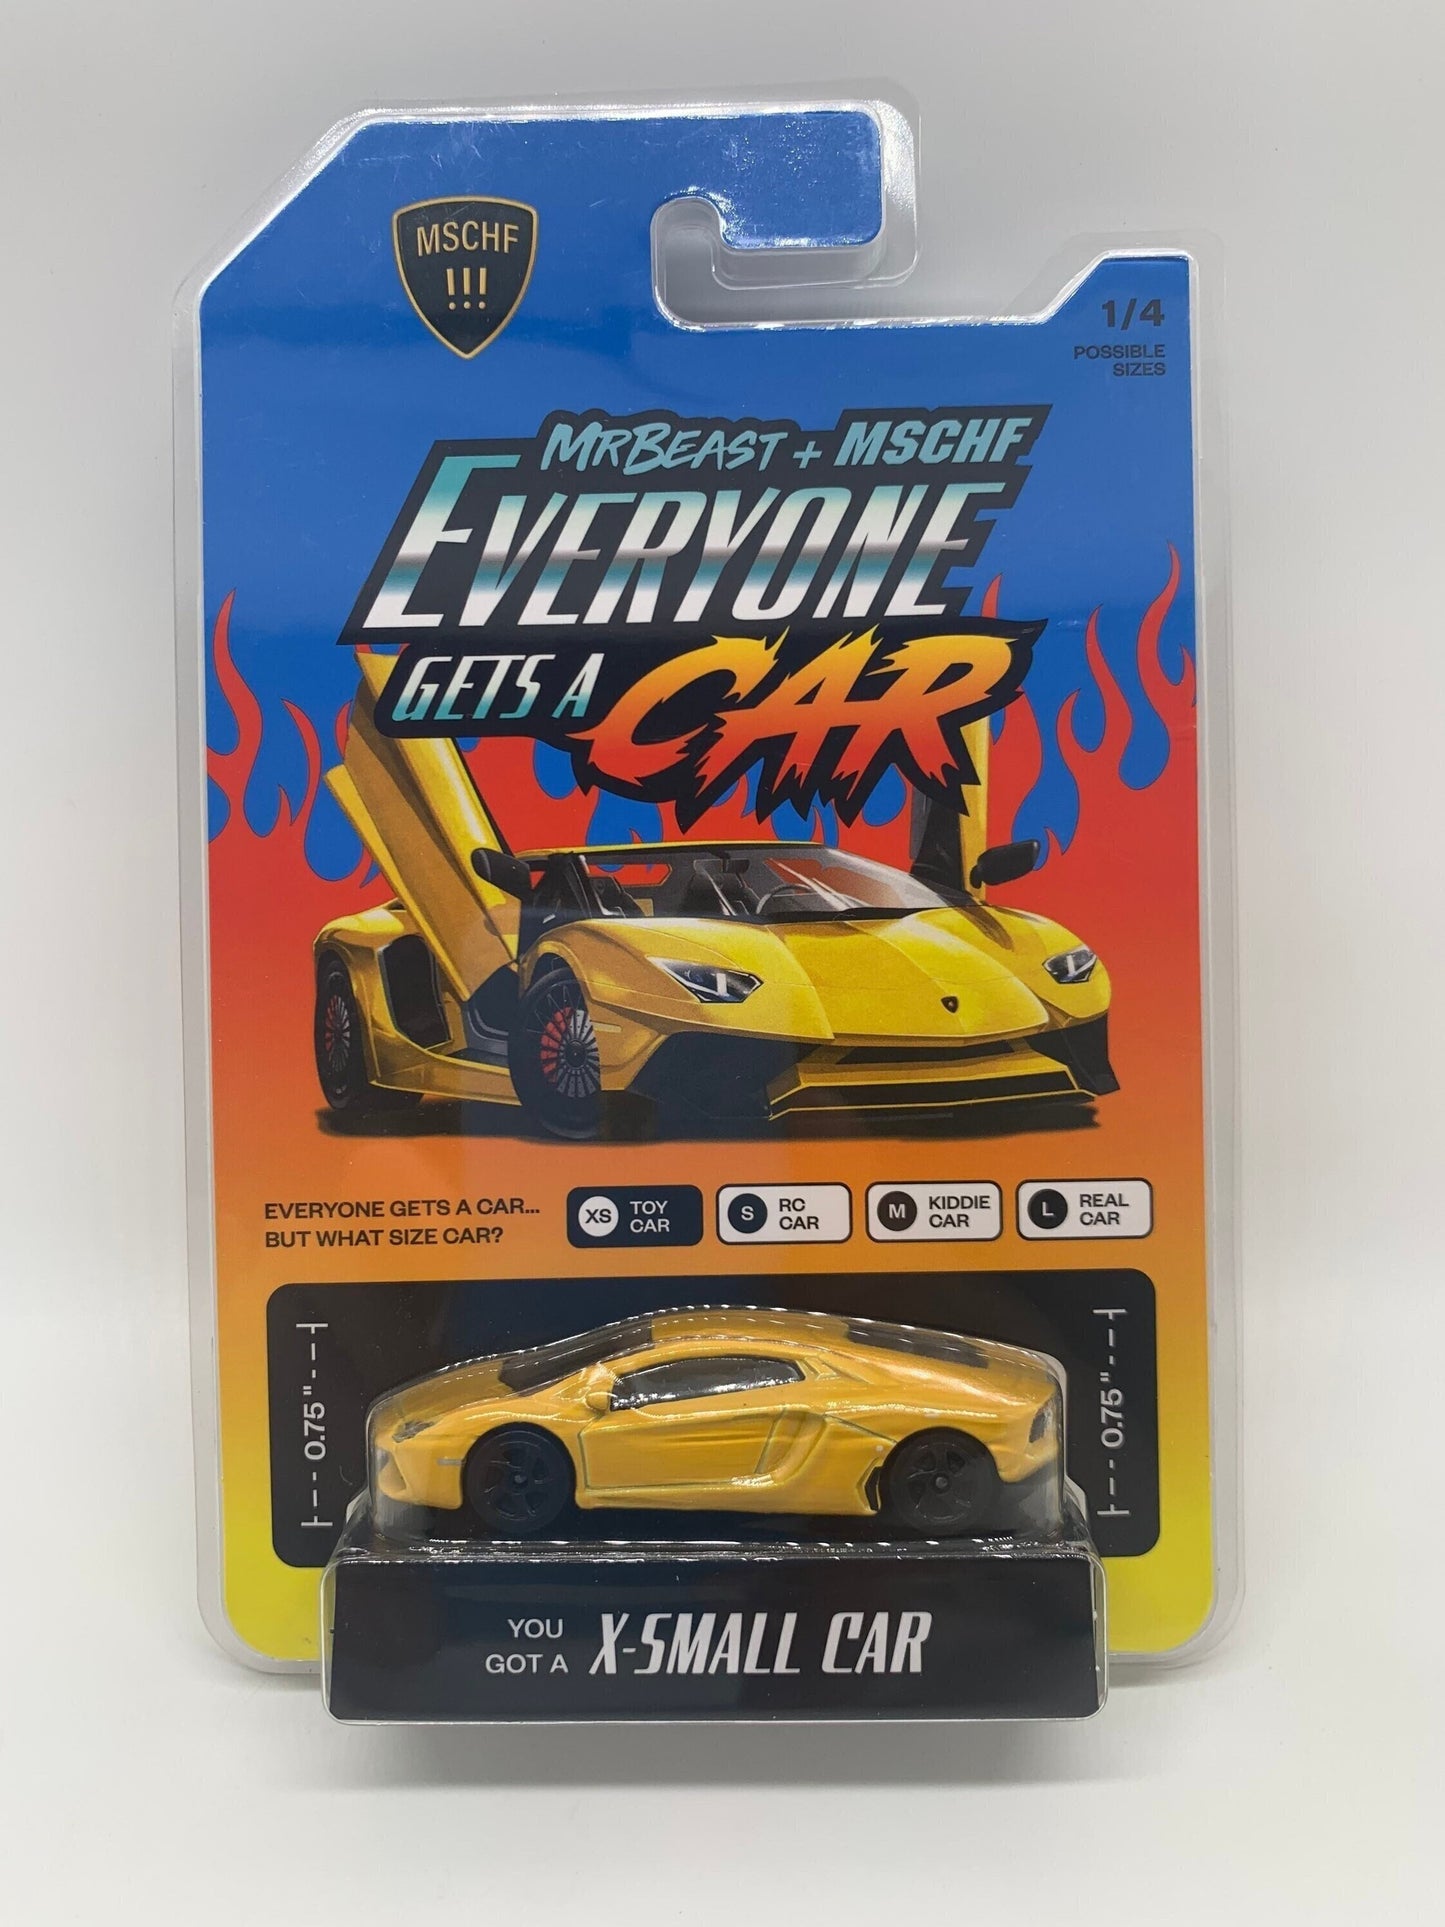 Mr Beast MSCHF Lamborghini Yellow Everyone Gets A Car Perfect Birthday Gift Miniature Collectable Scale Model Toy Car